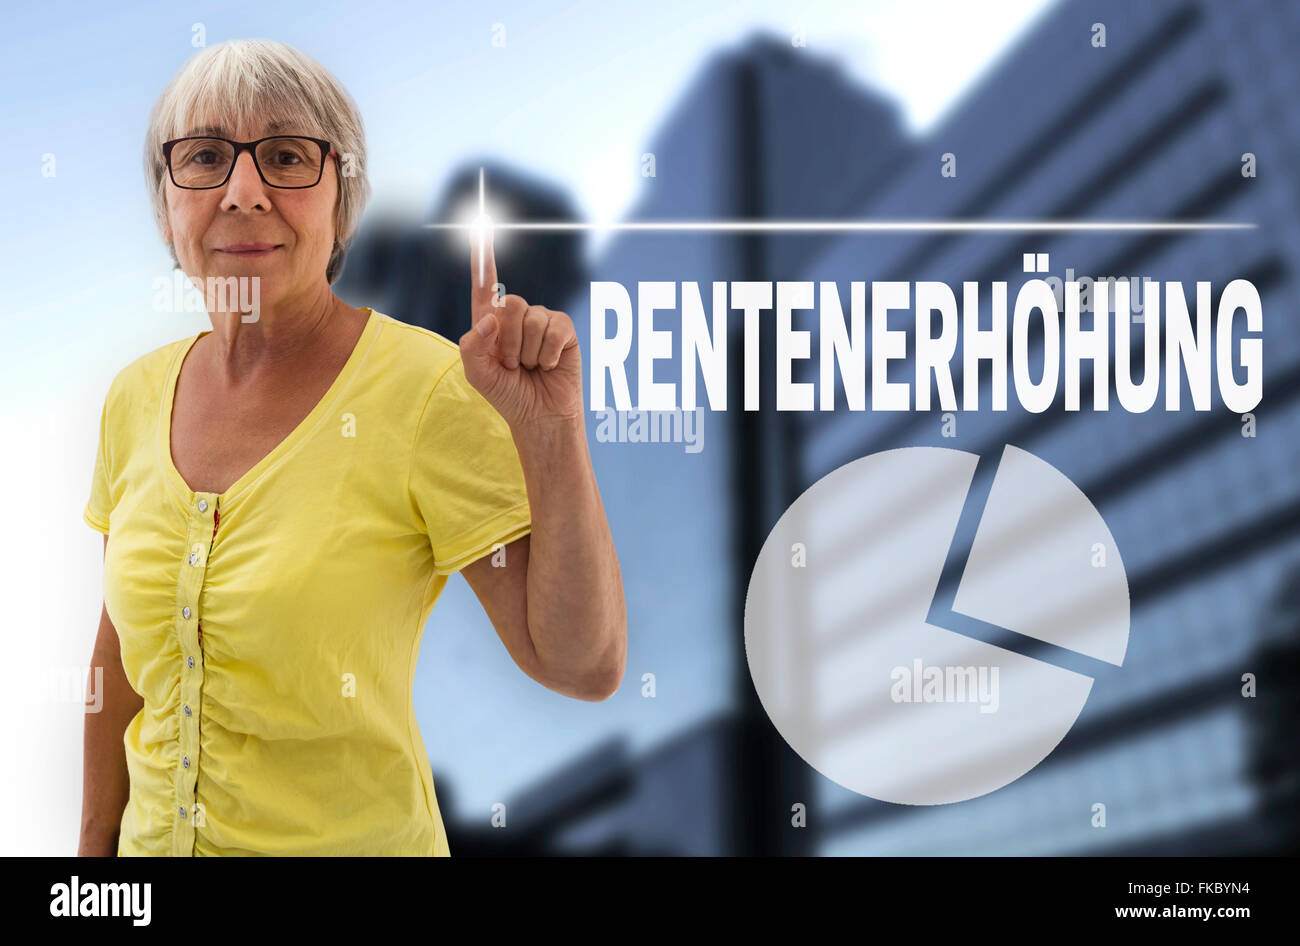 pension increase in german rentenerhoehung touchscreen is shown by senior. Stock Photo